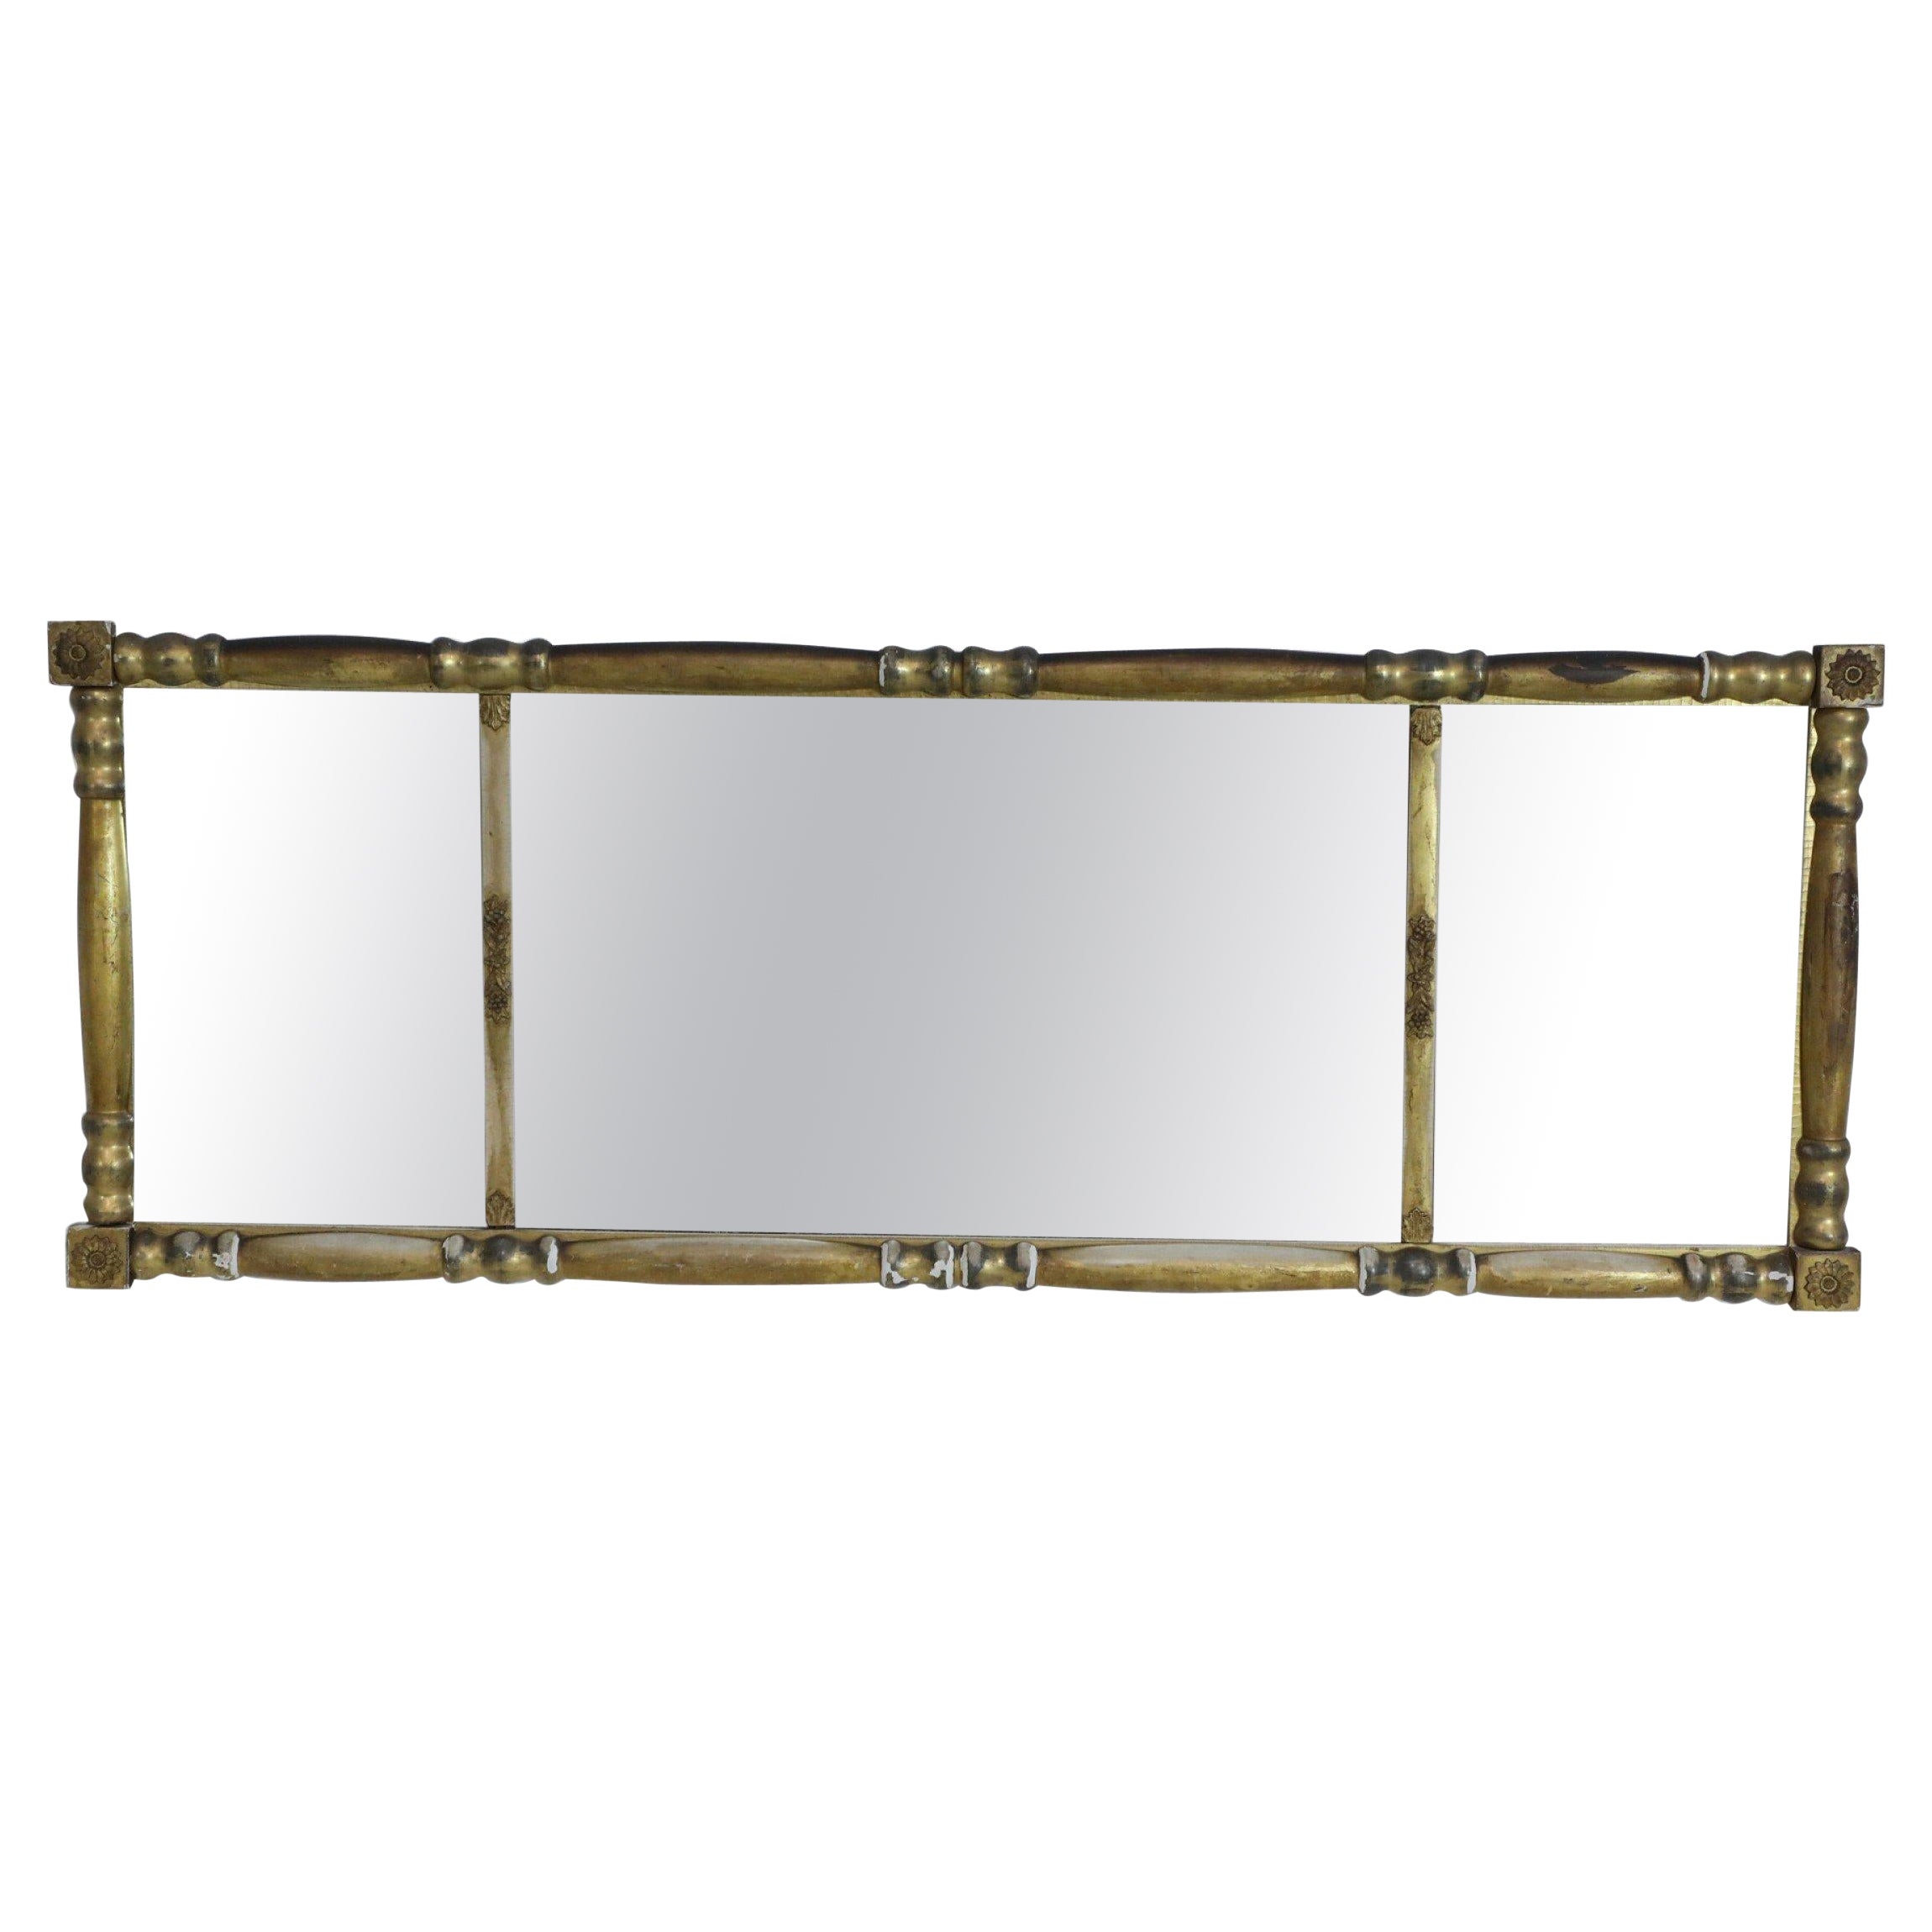 American Empire Column Form 3 Section Giltwood Overmantel Wall Mirror For Sale